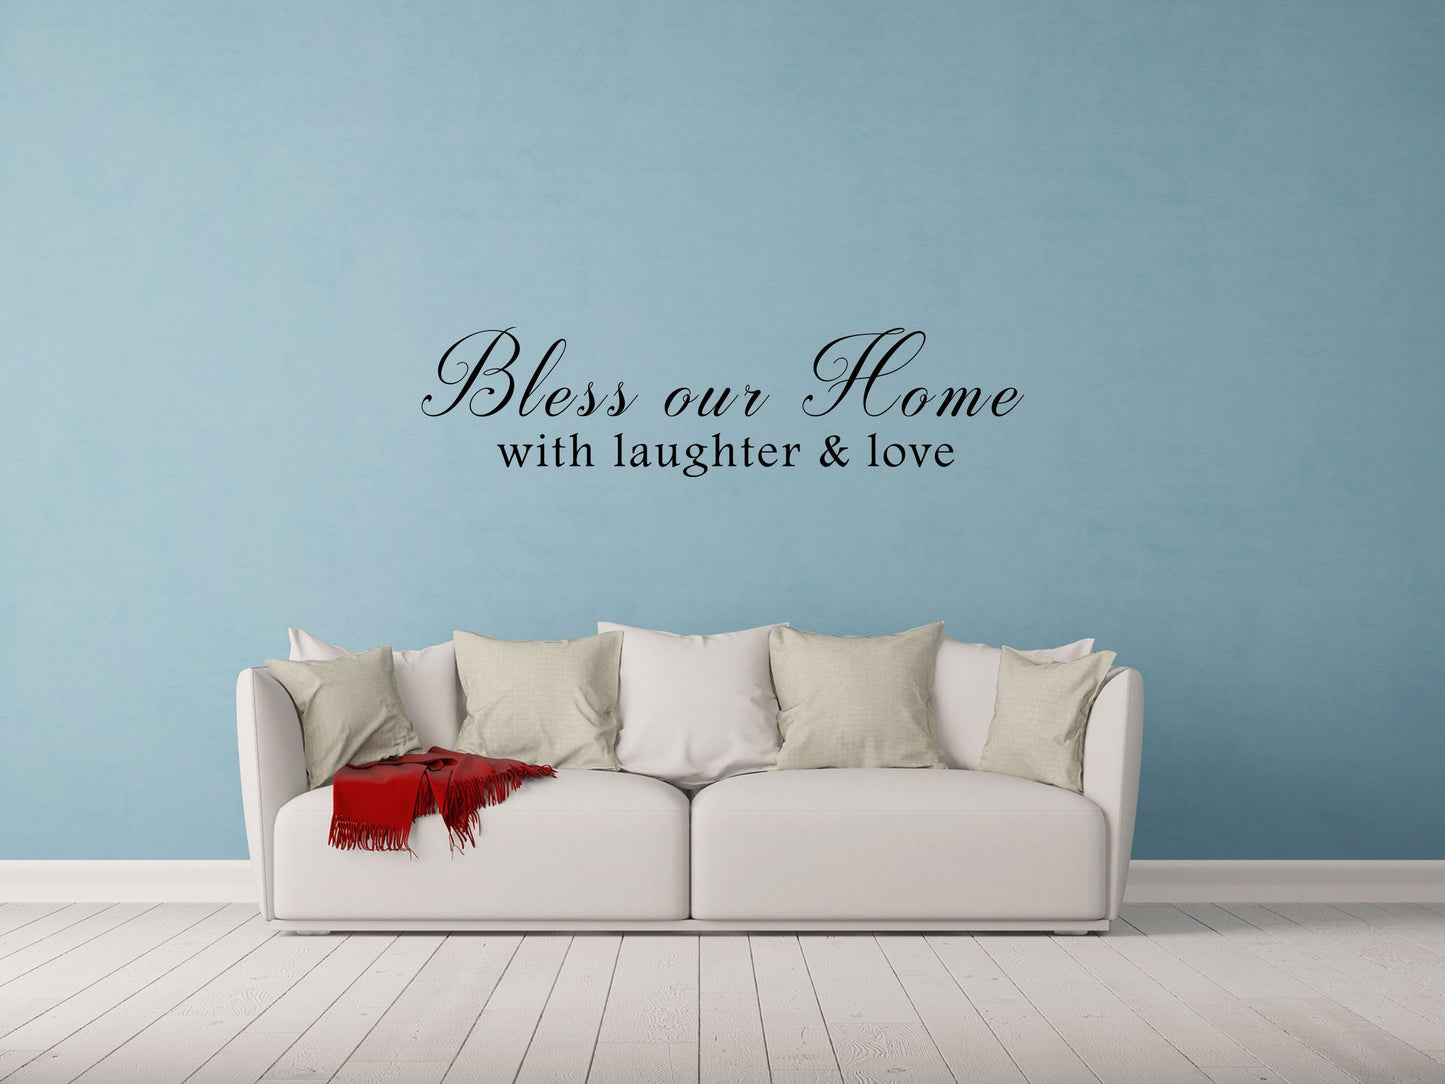 Bless Our Home With Laughter & Love Sticker - Inspirational Wall Decals Vinyl Wall Decal Inspirational Wall Signs 